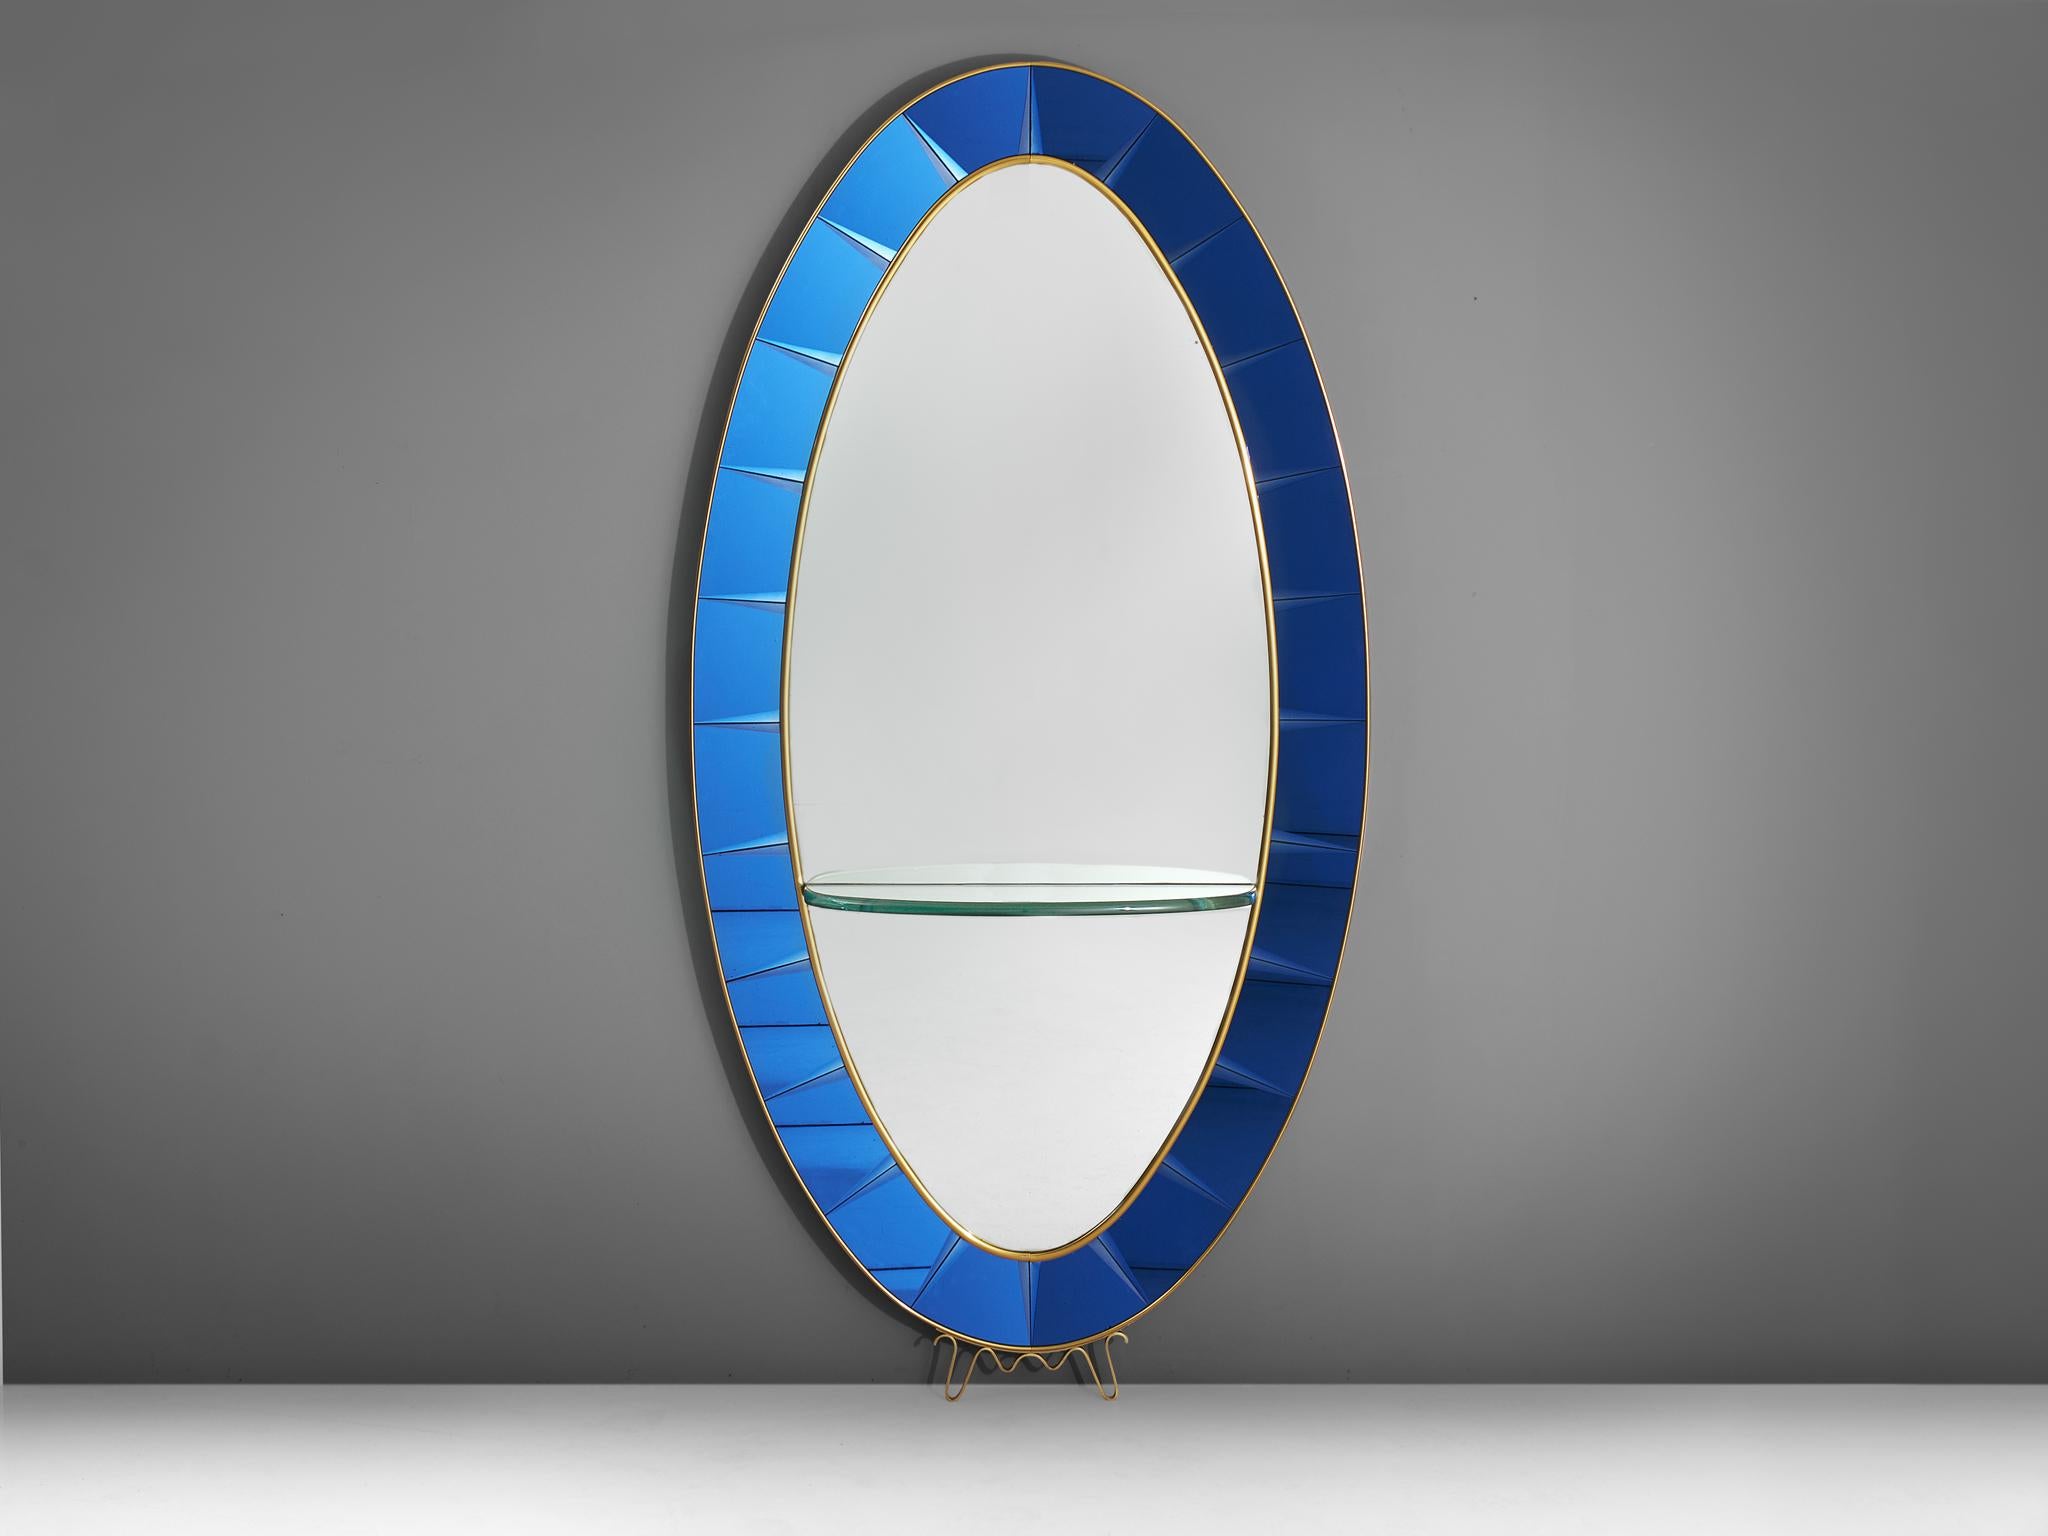 Cristal Arte, mirror, blue glass, Italy, 1950s.

The mirror is surrounded by beveled blue glass panels, placed in a gilt brass and wooden frame. The glass panels have been very well executed in typically Cristal Arte cobalt blue. The brass frame